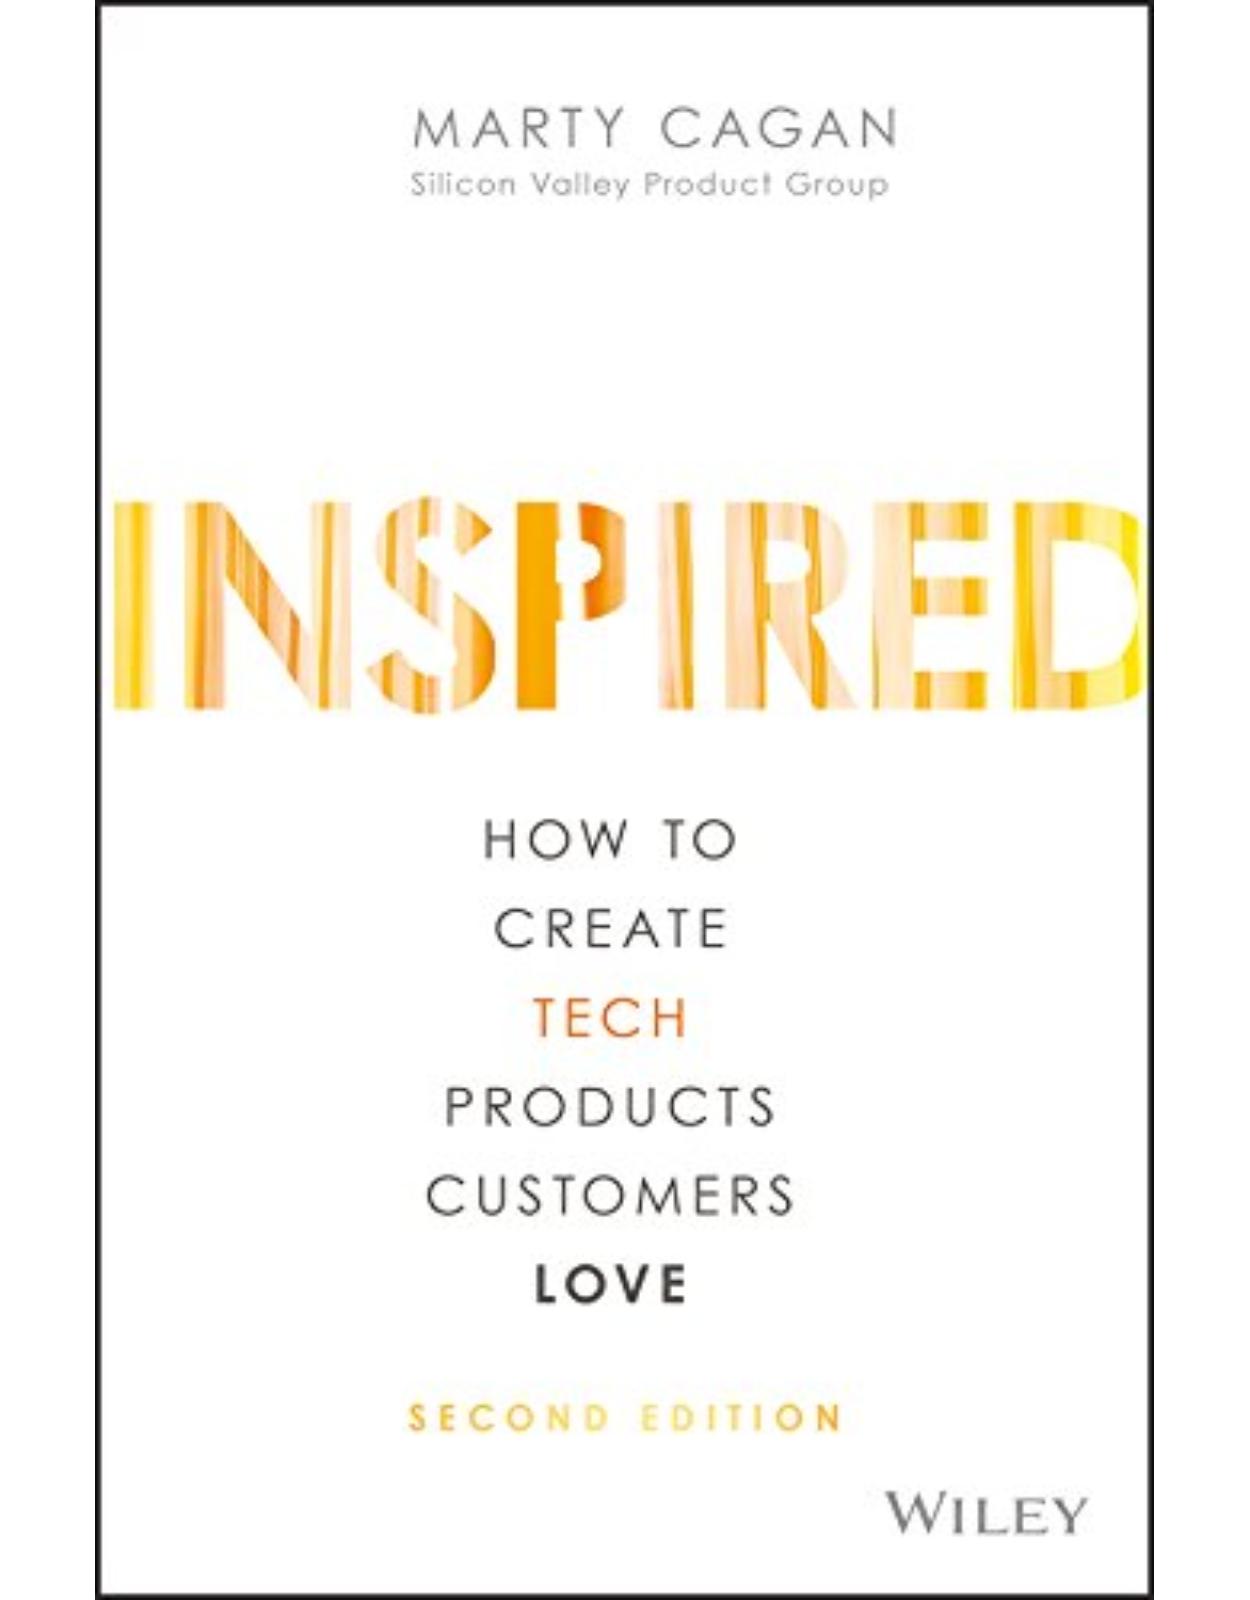 Inspired: How to Create Tech Products Customers Love